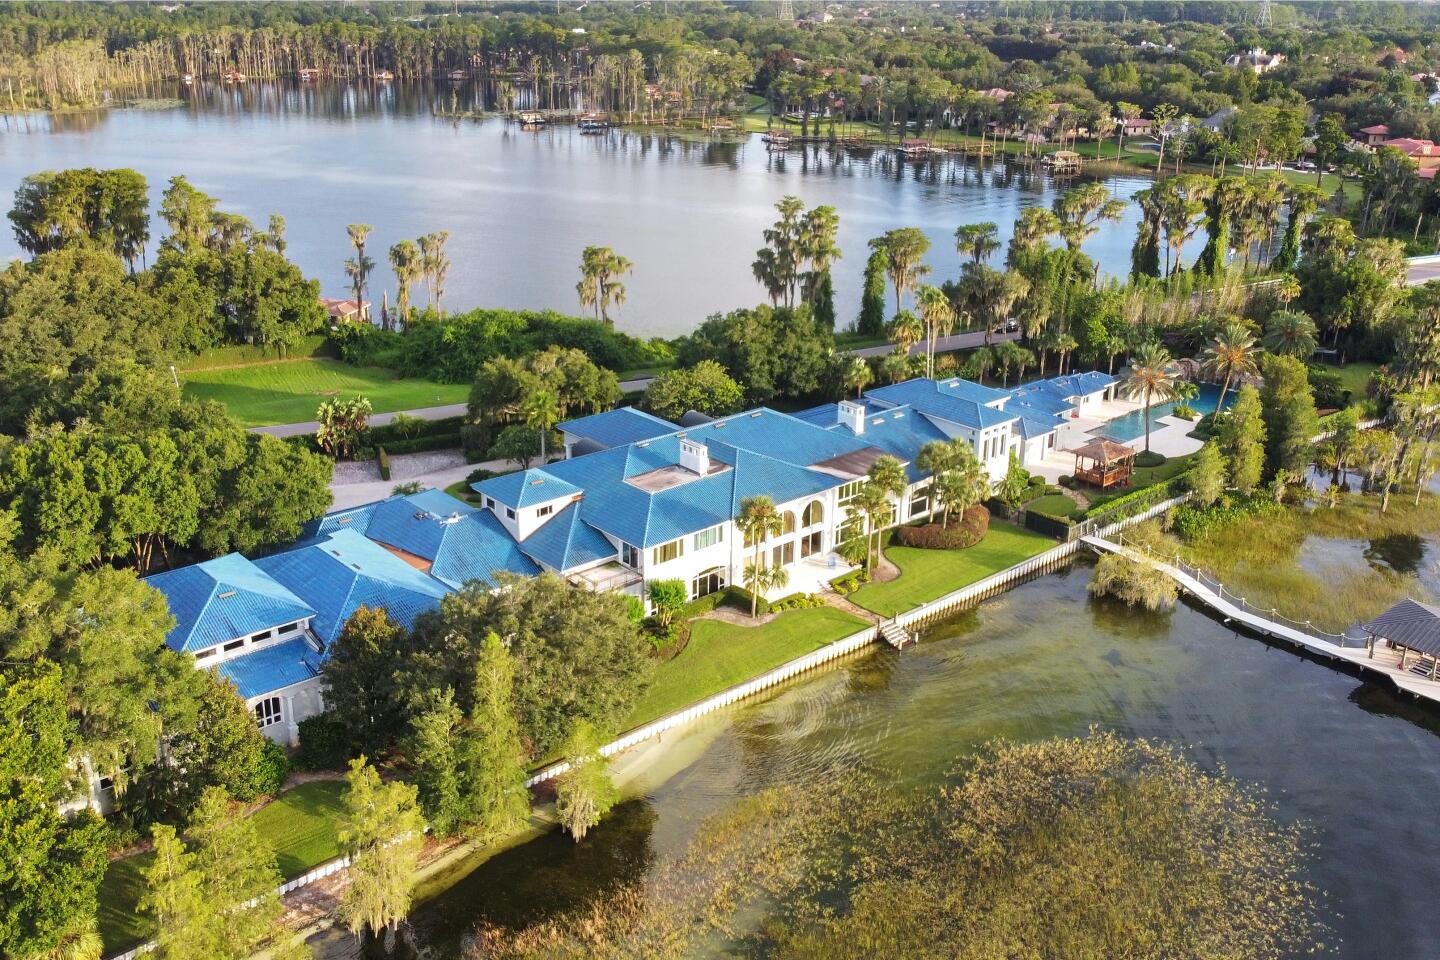 Shaq's Florida estate: the waterfront home